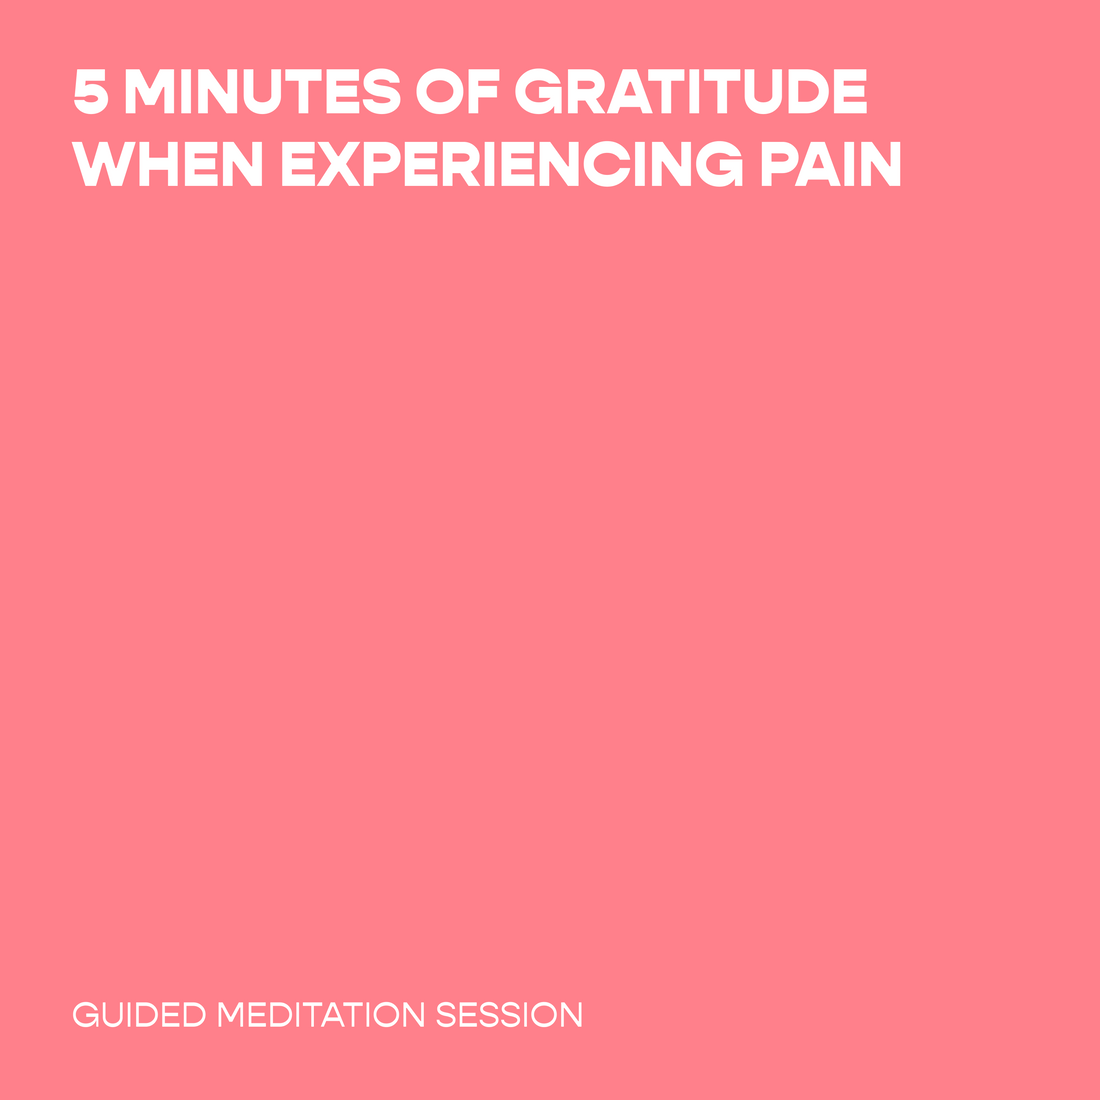 5 Minutes of Gratitude when Experiencing Pain